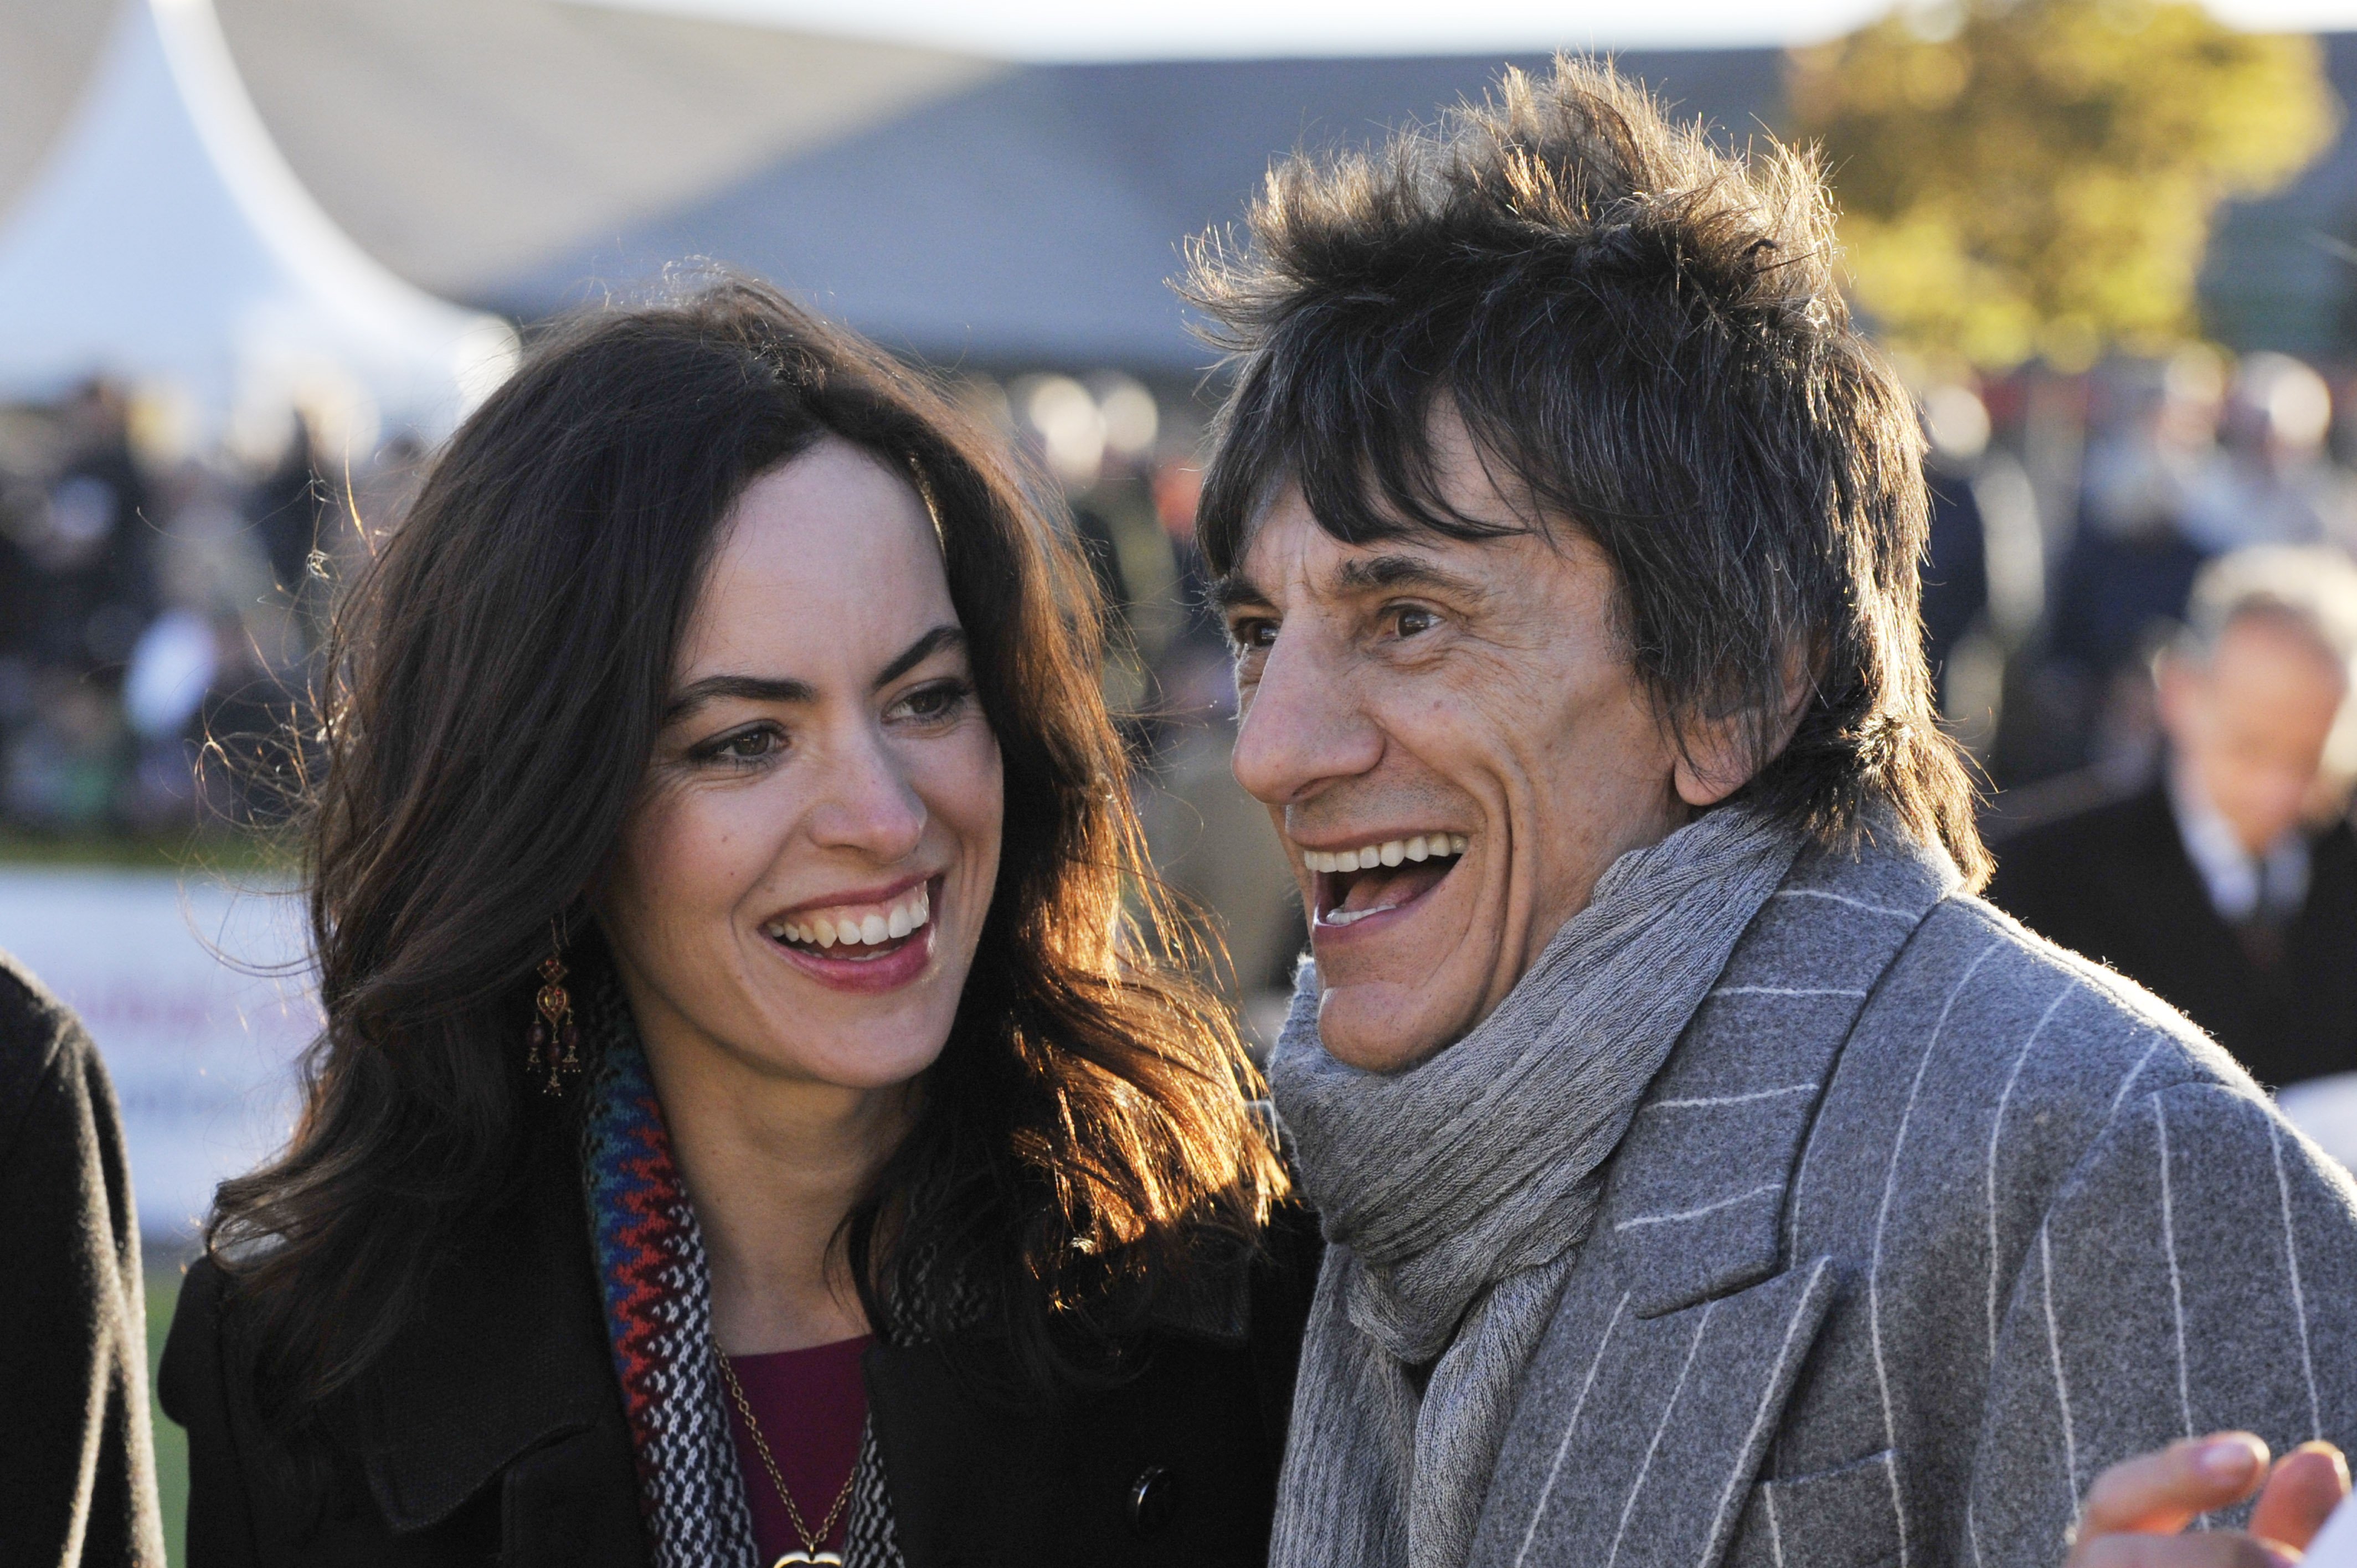 Sally Humphreys and Ronnie Wood attends the Punchestown Racecourse in Naas, Ireland on April 30, 2015 | Photo: Getty Images